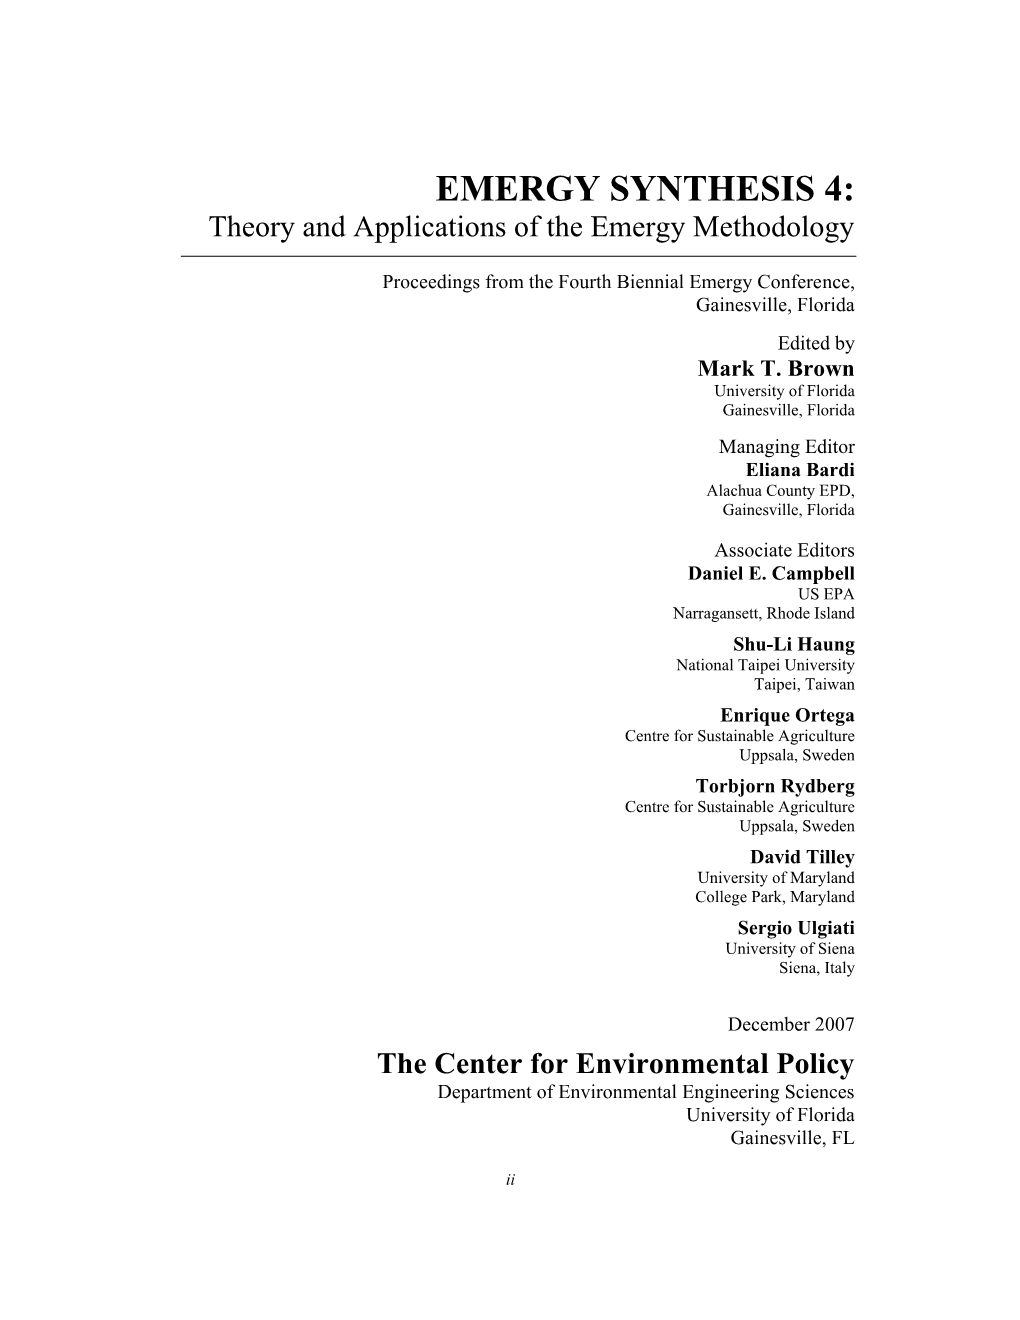 EMERGY SYNTHESIS 4: Theory and Applications of the Emergy Methodology